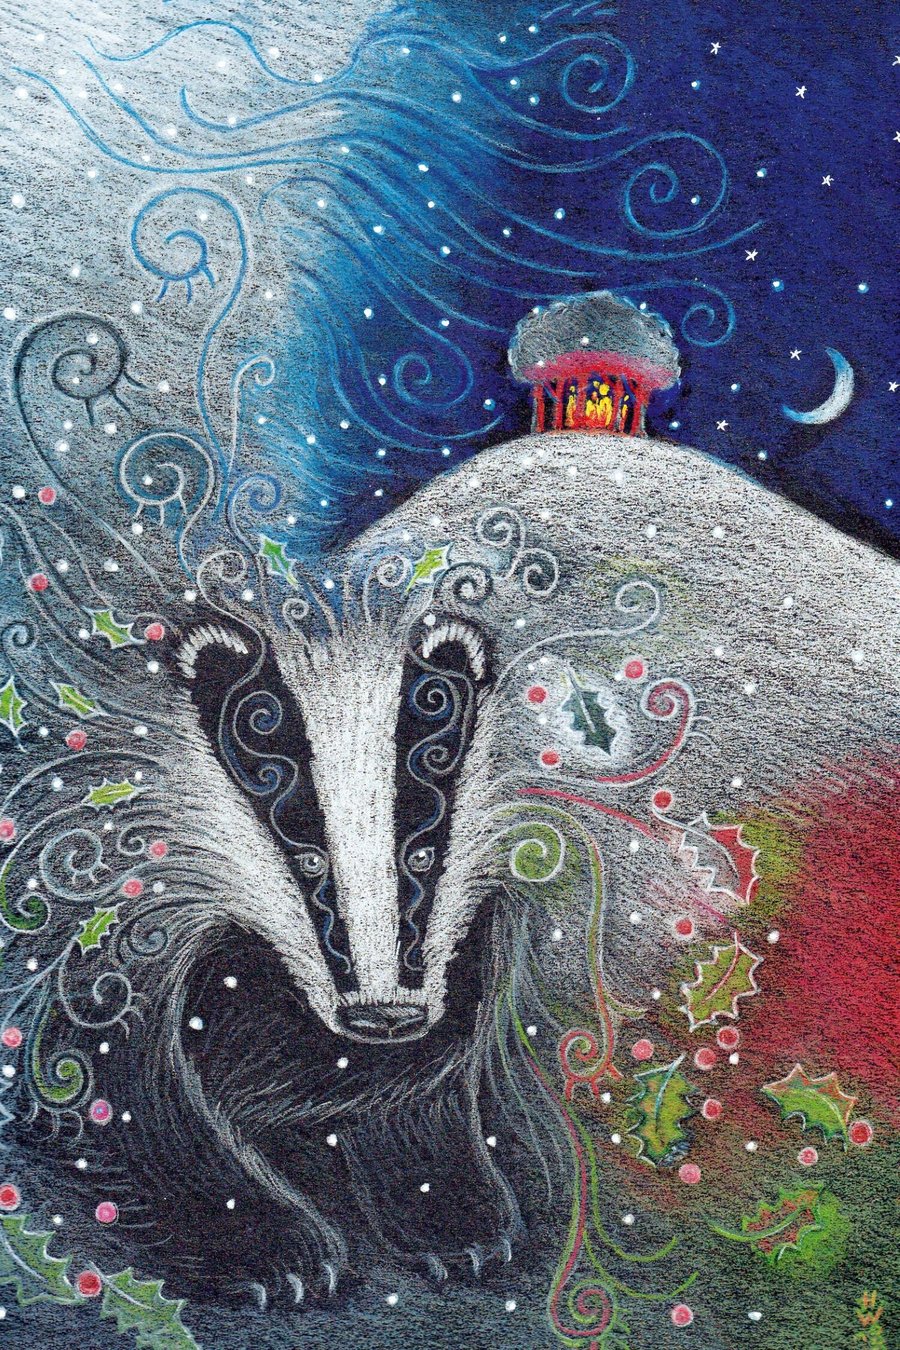 Yule Badger signed limited edition Giclee print of 100 by Hannah Willow